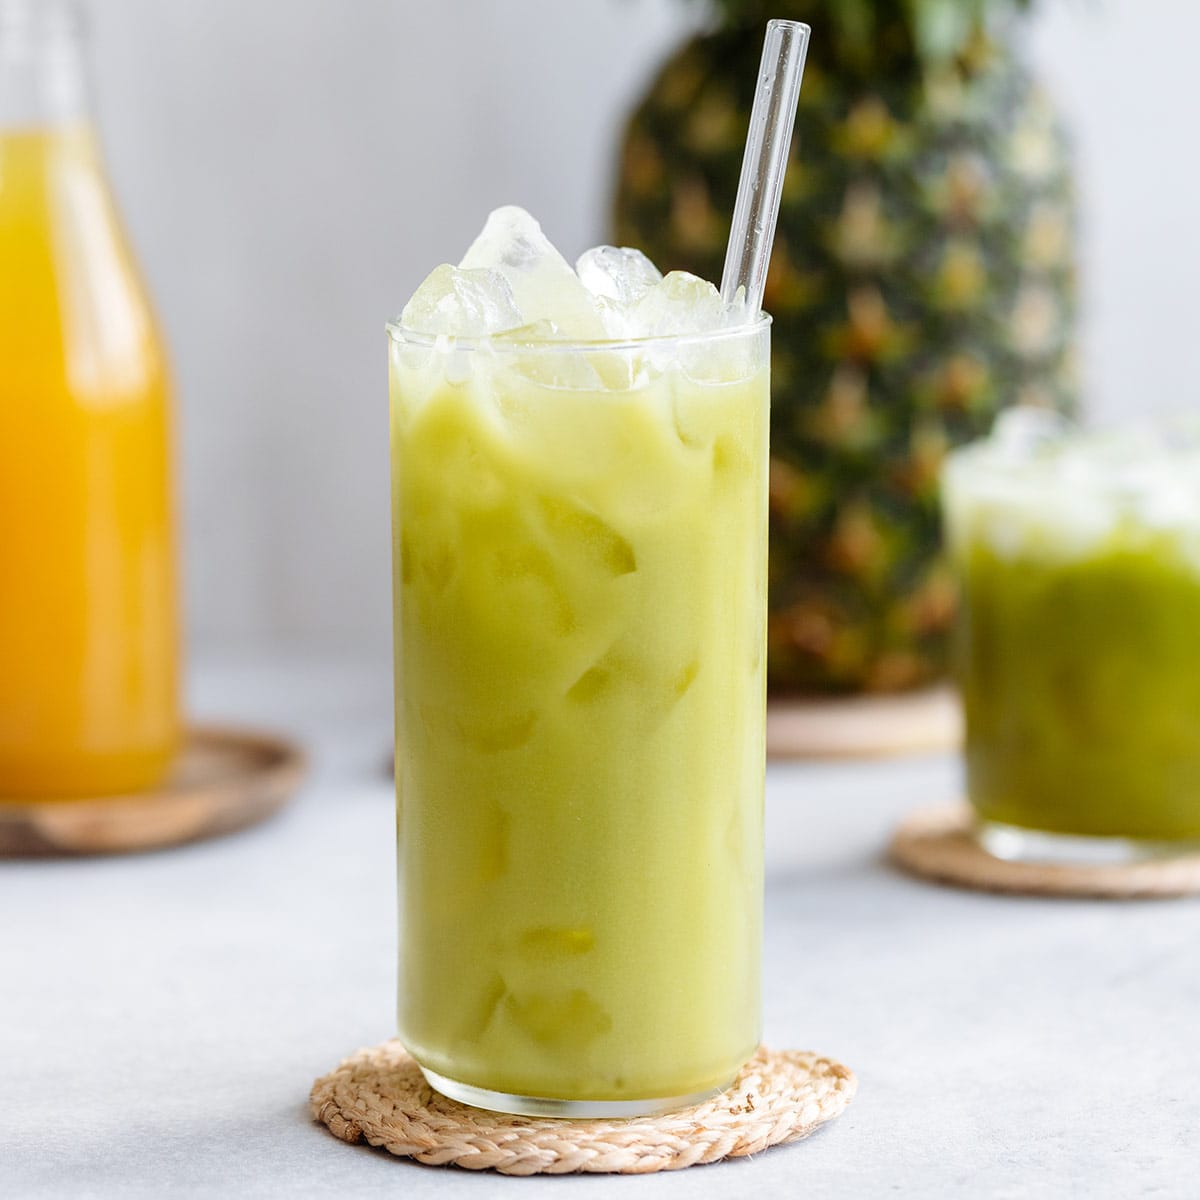 Pineapple drink in a tall glass served over ice and a glass straw.